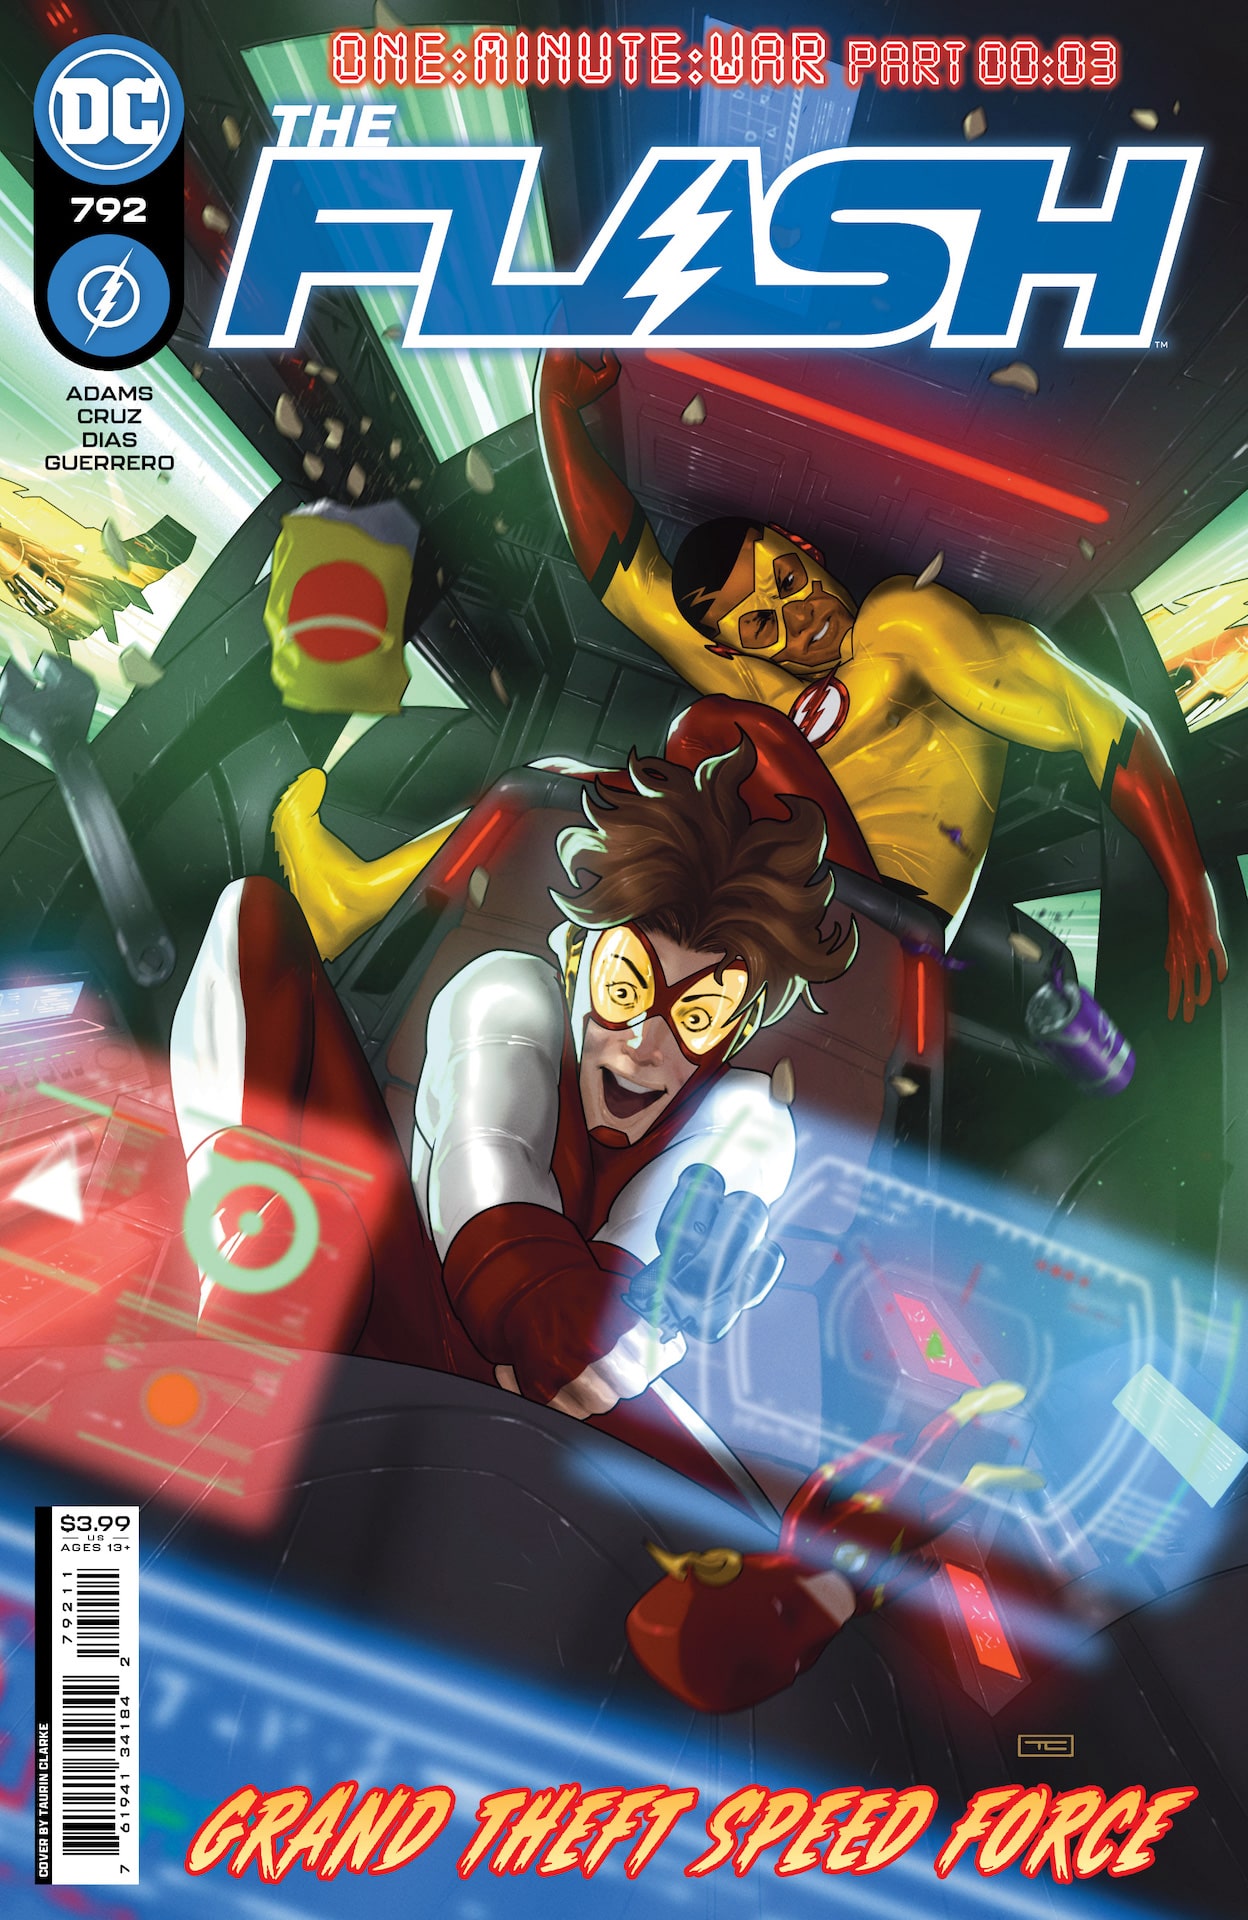 DC Preview: The Flash #792